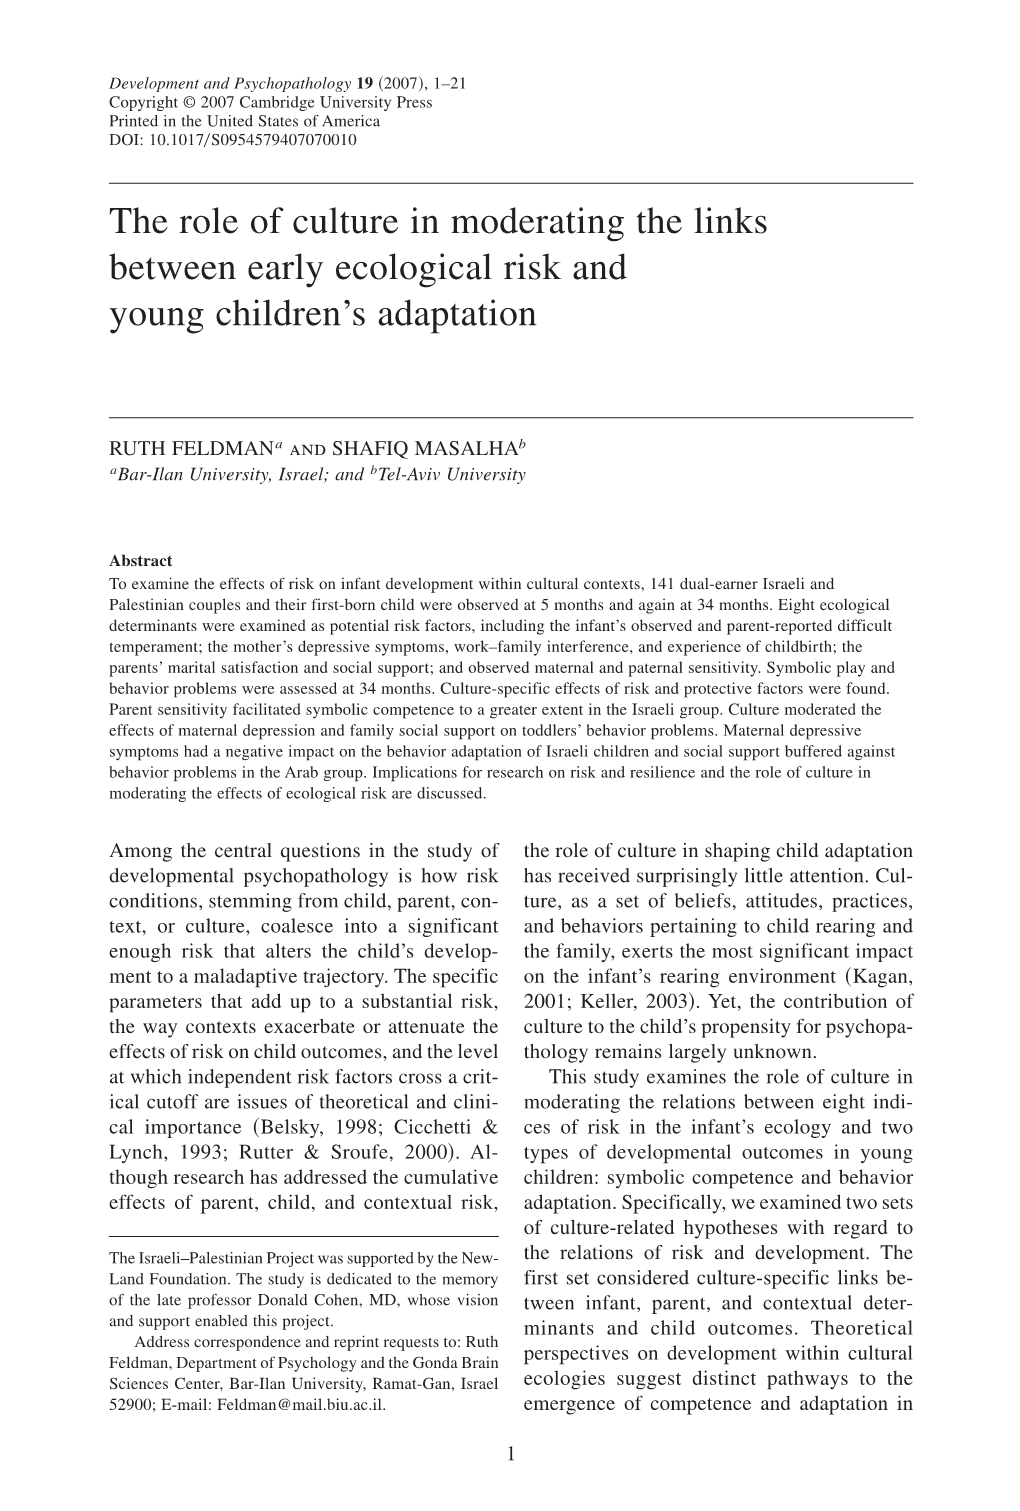 The Role of Culture in Moderating the Links Between Early Ecological Risk and Young Children’S Adaptation